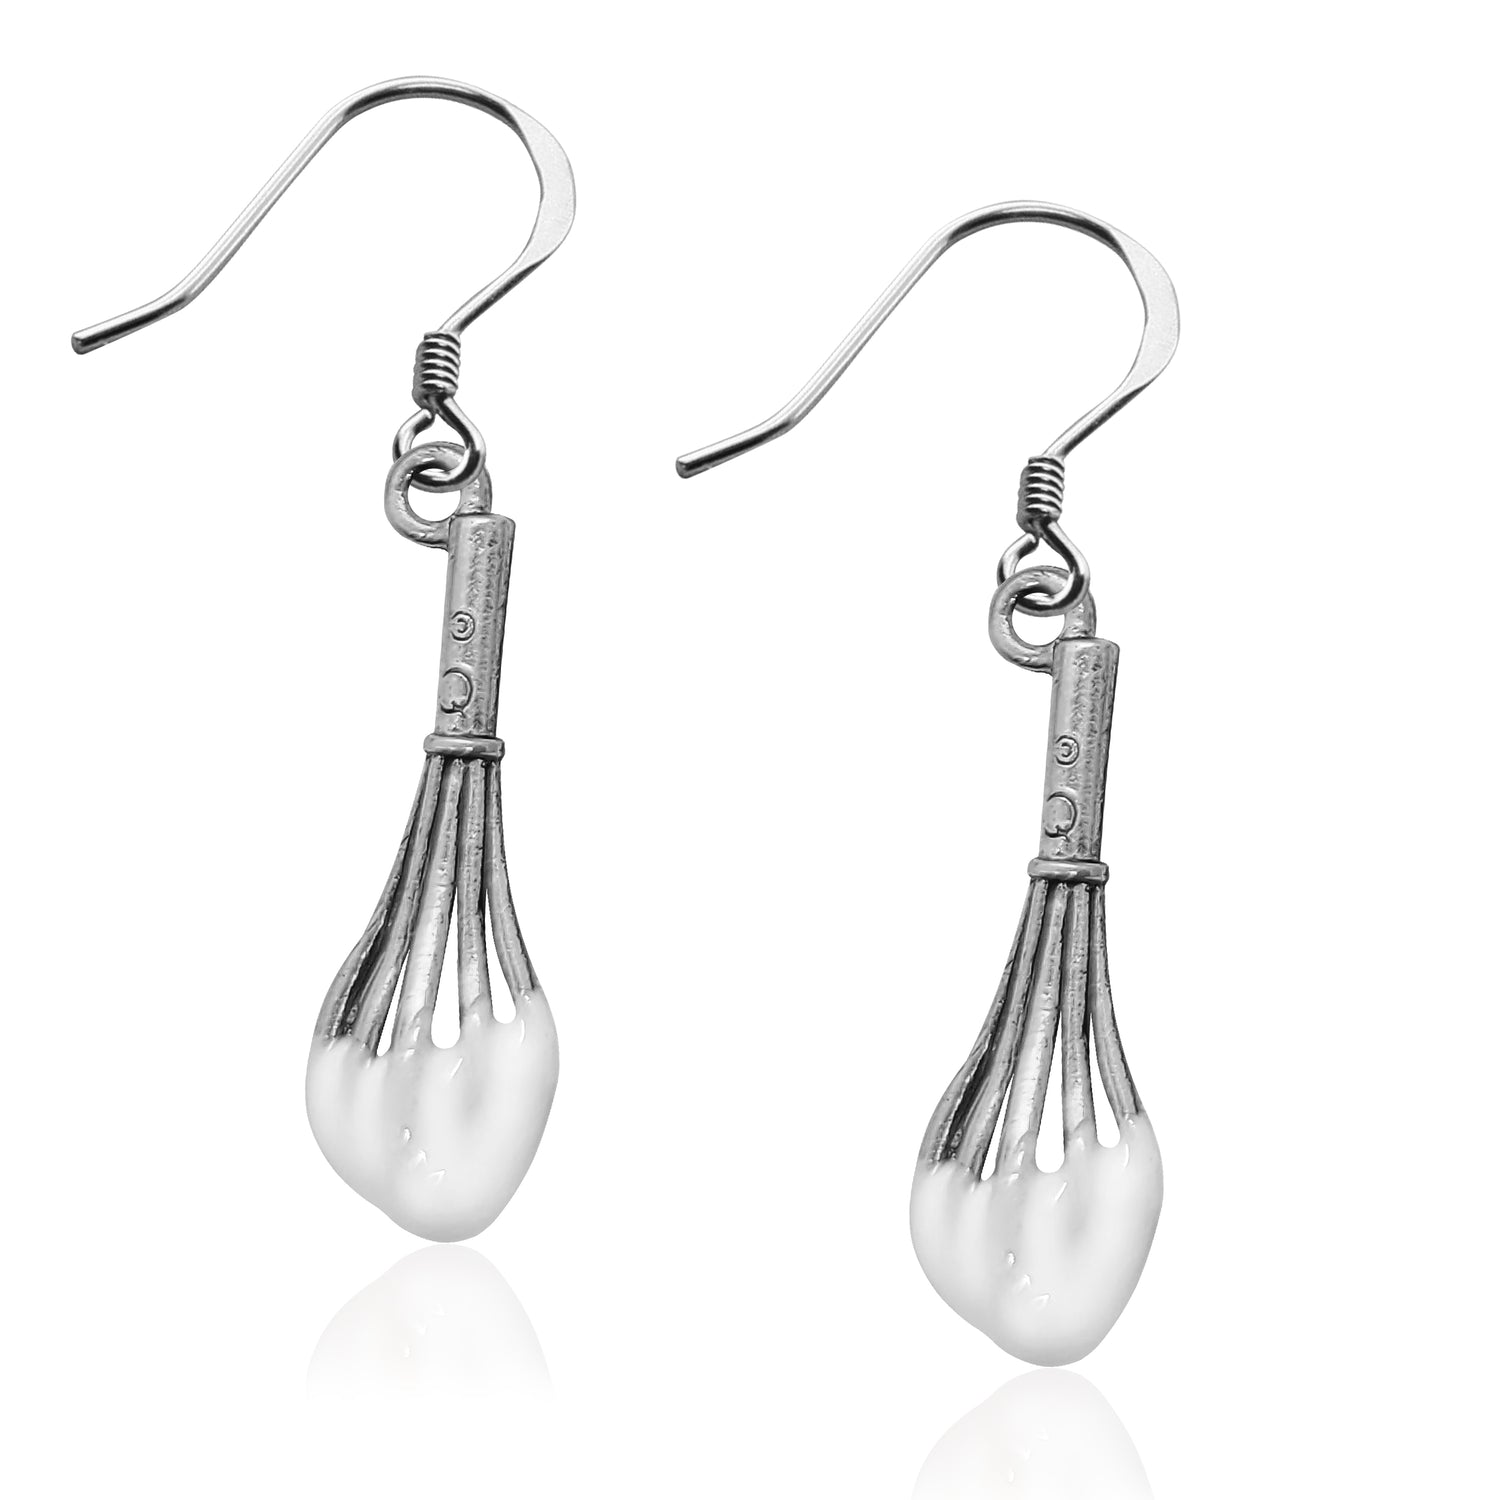 Whimsical Gifts | Whisk with Frosting Charm Earrings in Silver Finish | Hobbies & Special Interests | Chef | Cooking | Baking | Jewelry